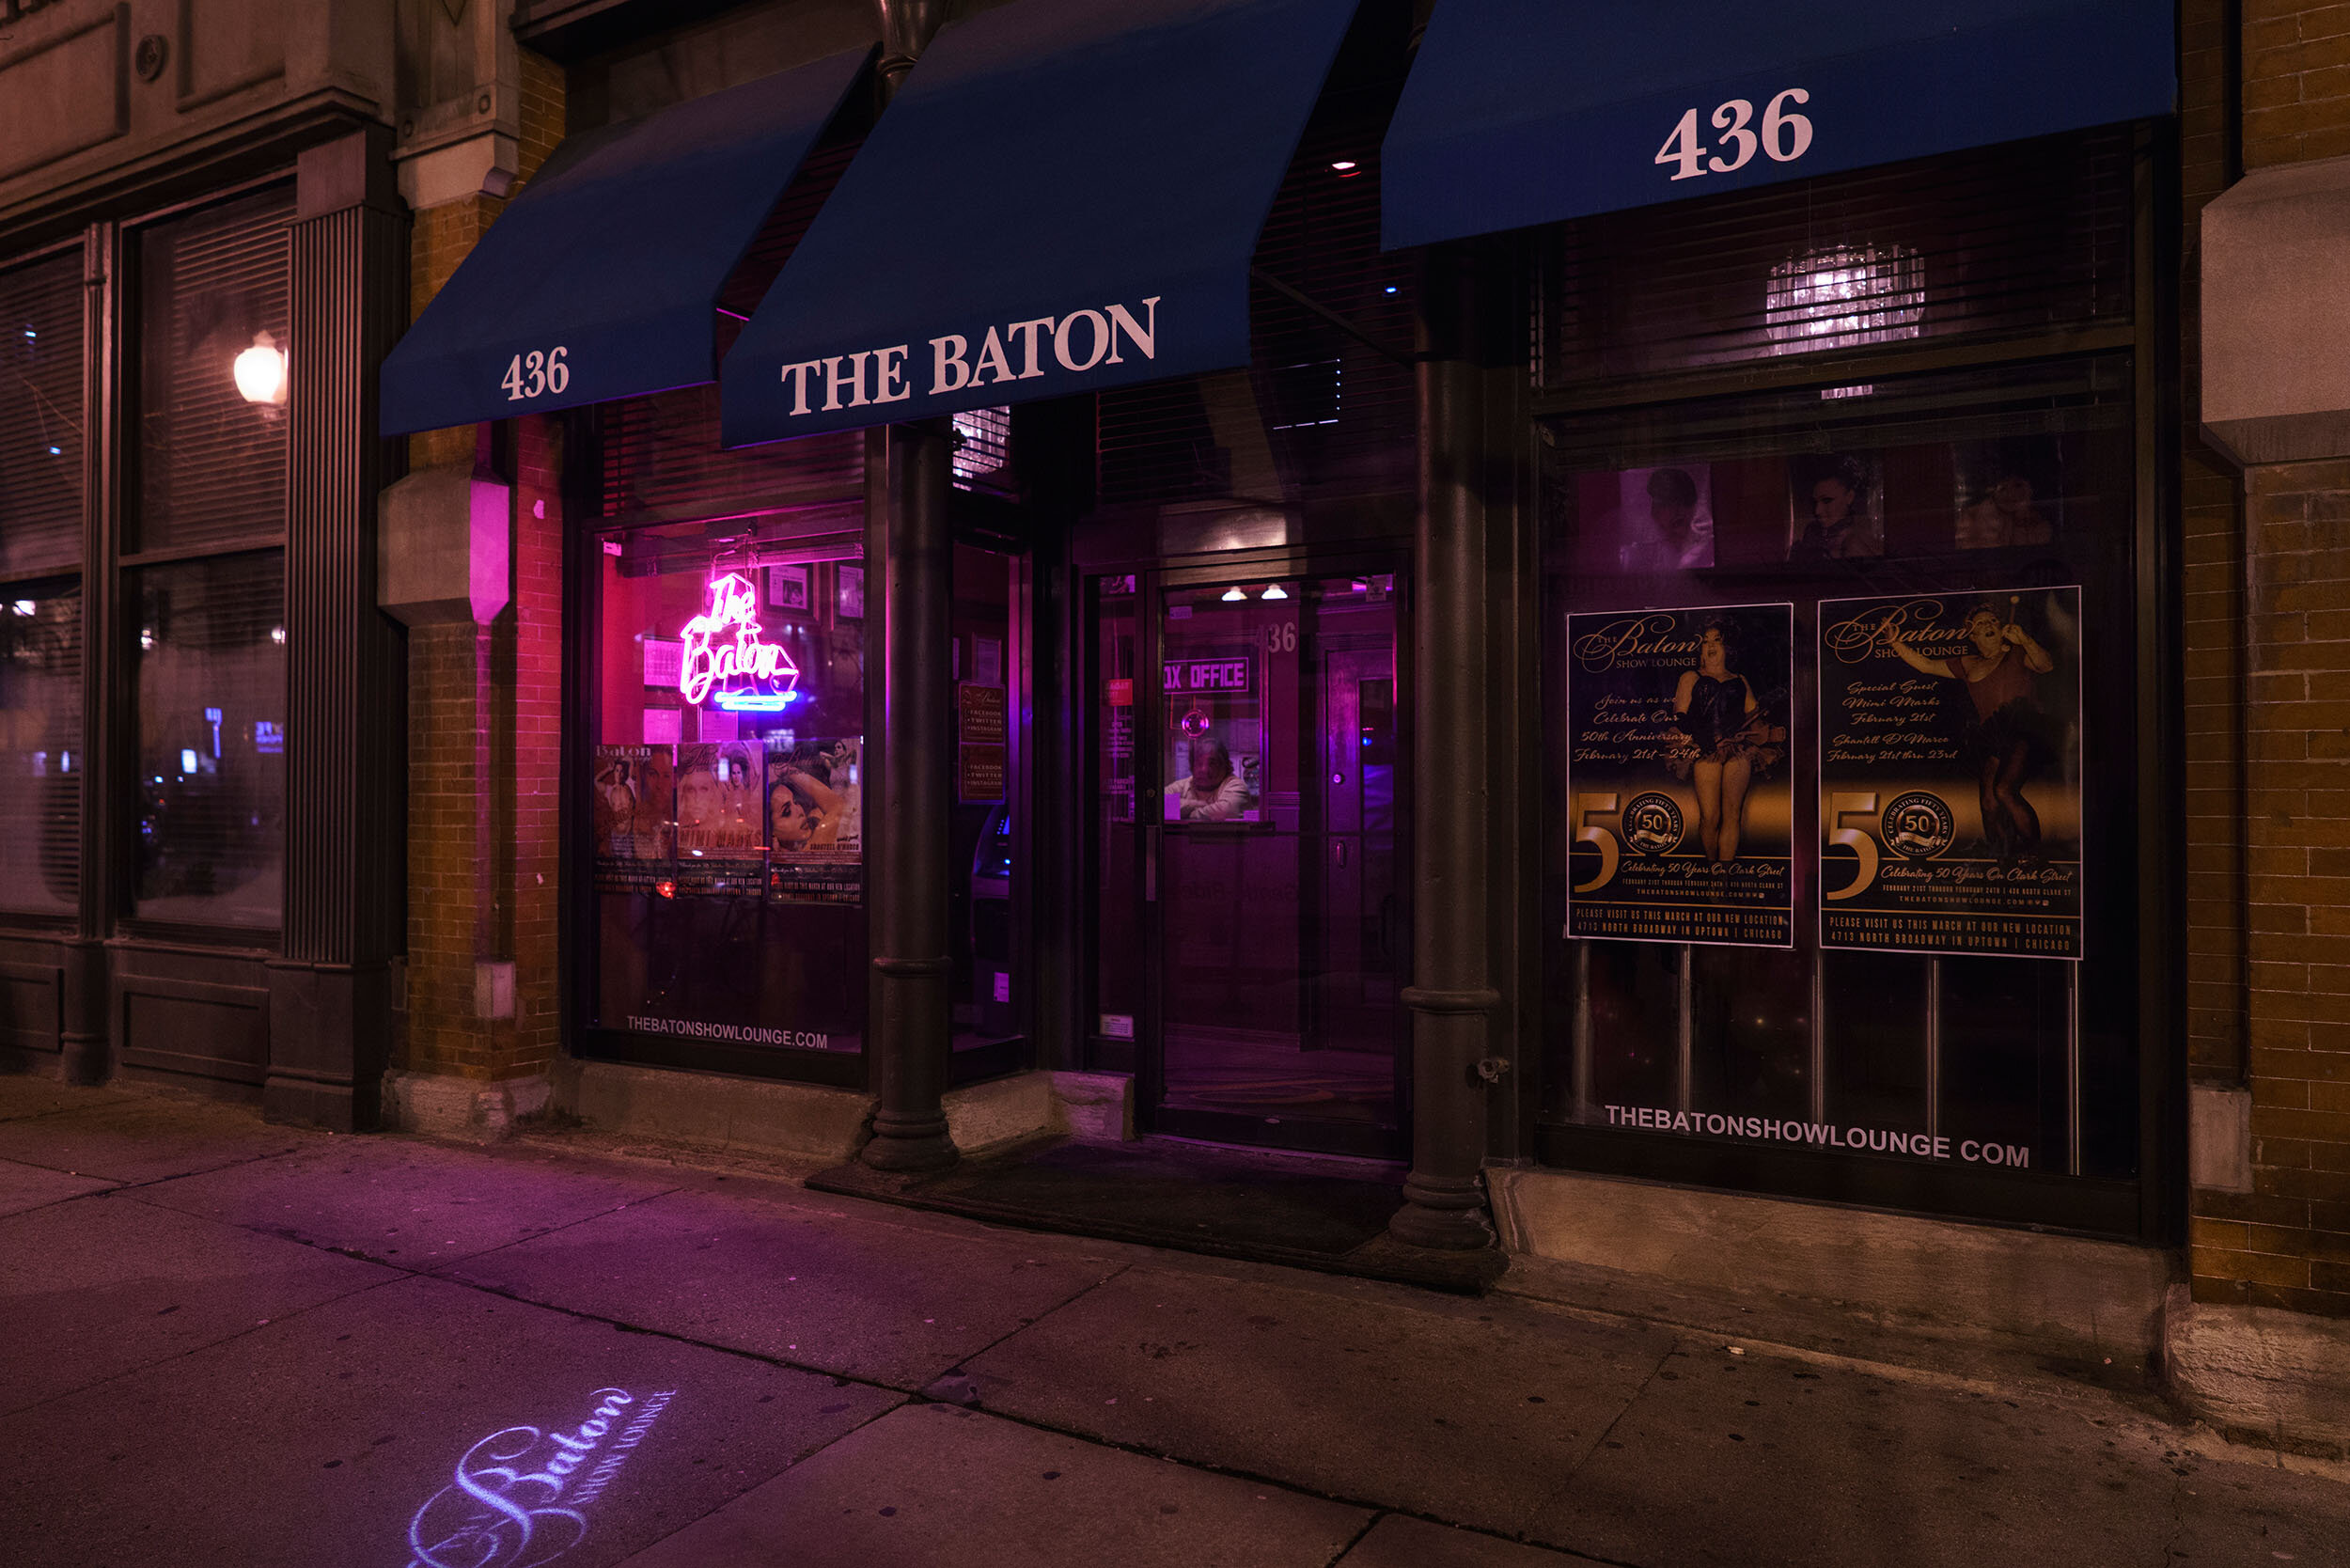  The final weekend of drag performances at the iconic Baton Show Lounge's downtown location. After fifty years, they decided to relocate due to rent increases.  